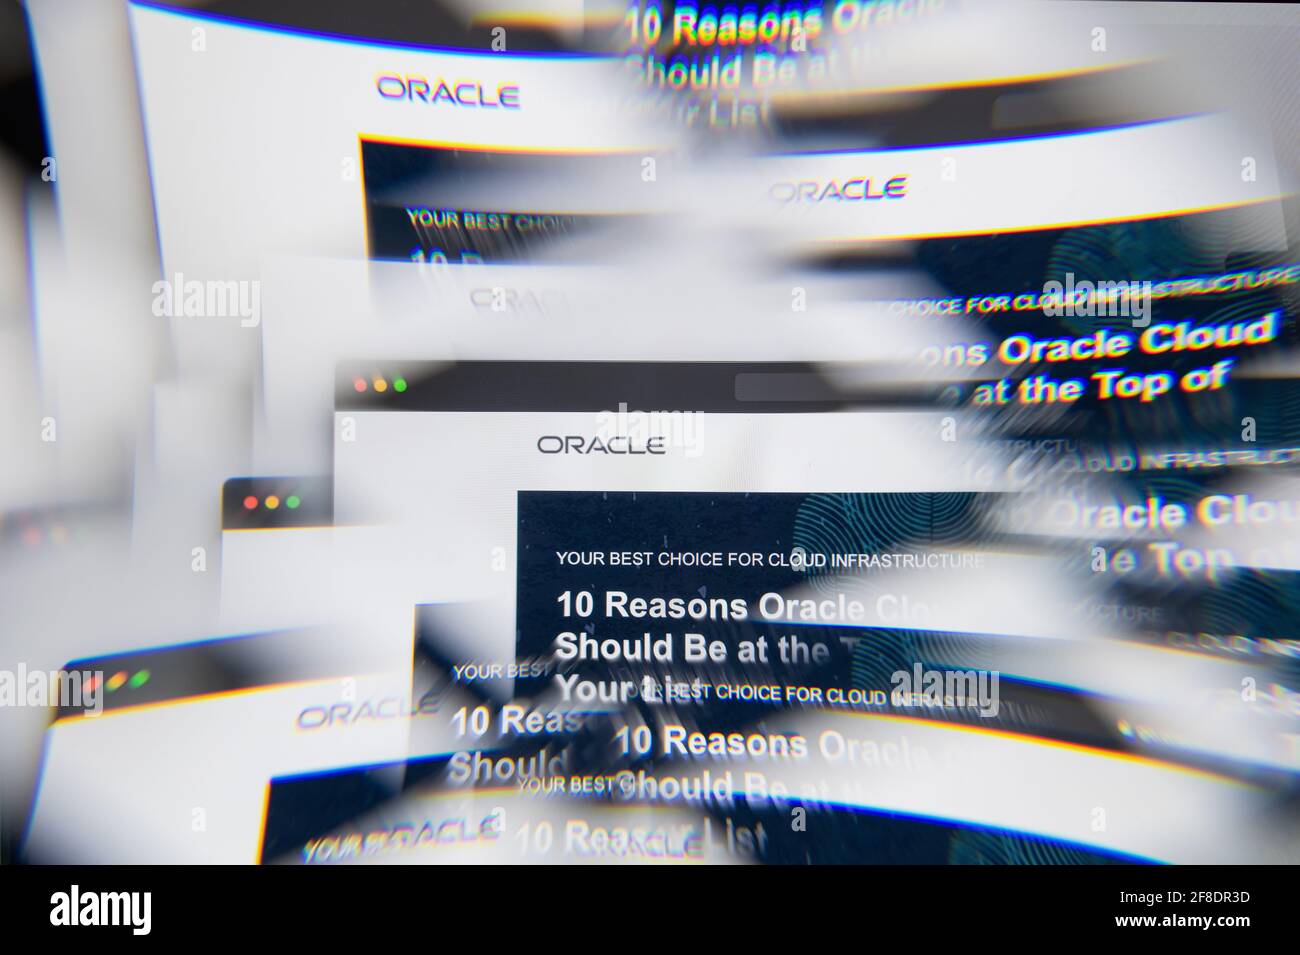 Milan, Italy - APRIL 10, 2021: Oracle service cloud logo on laptop screen seen through an optical prism. Illustrative editorial image from Oracle serv Stock Photo